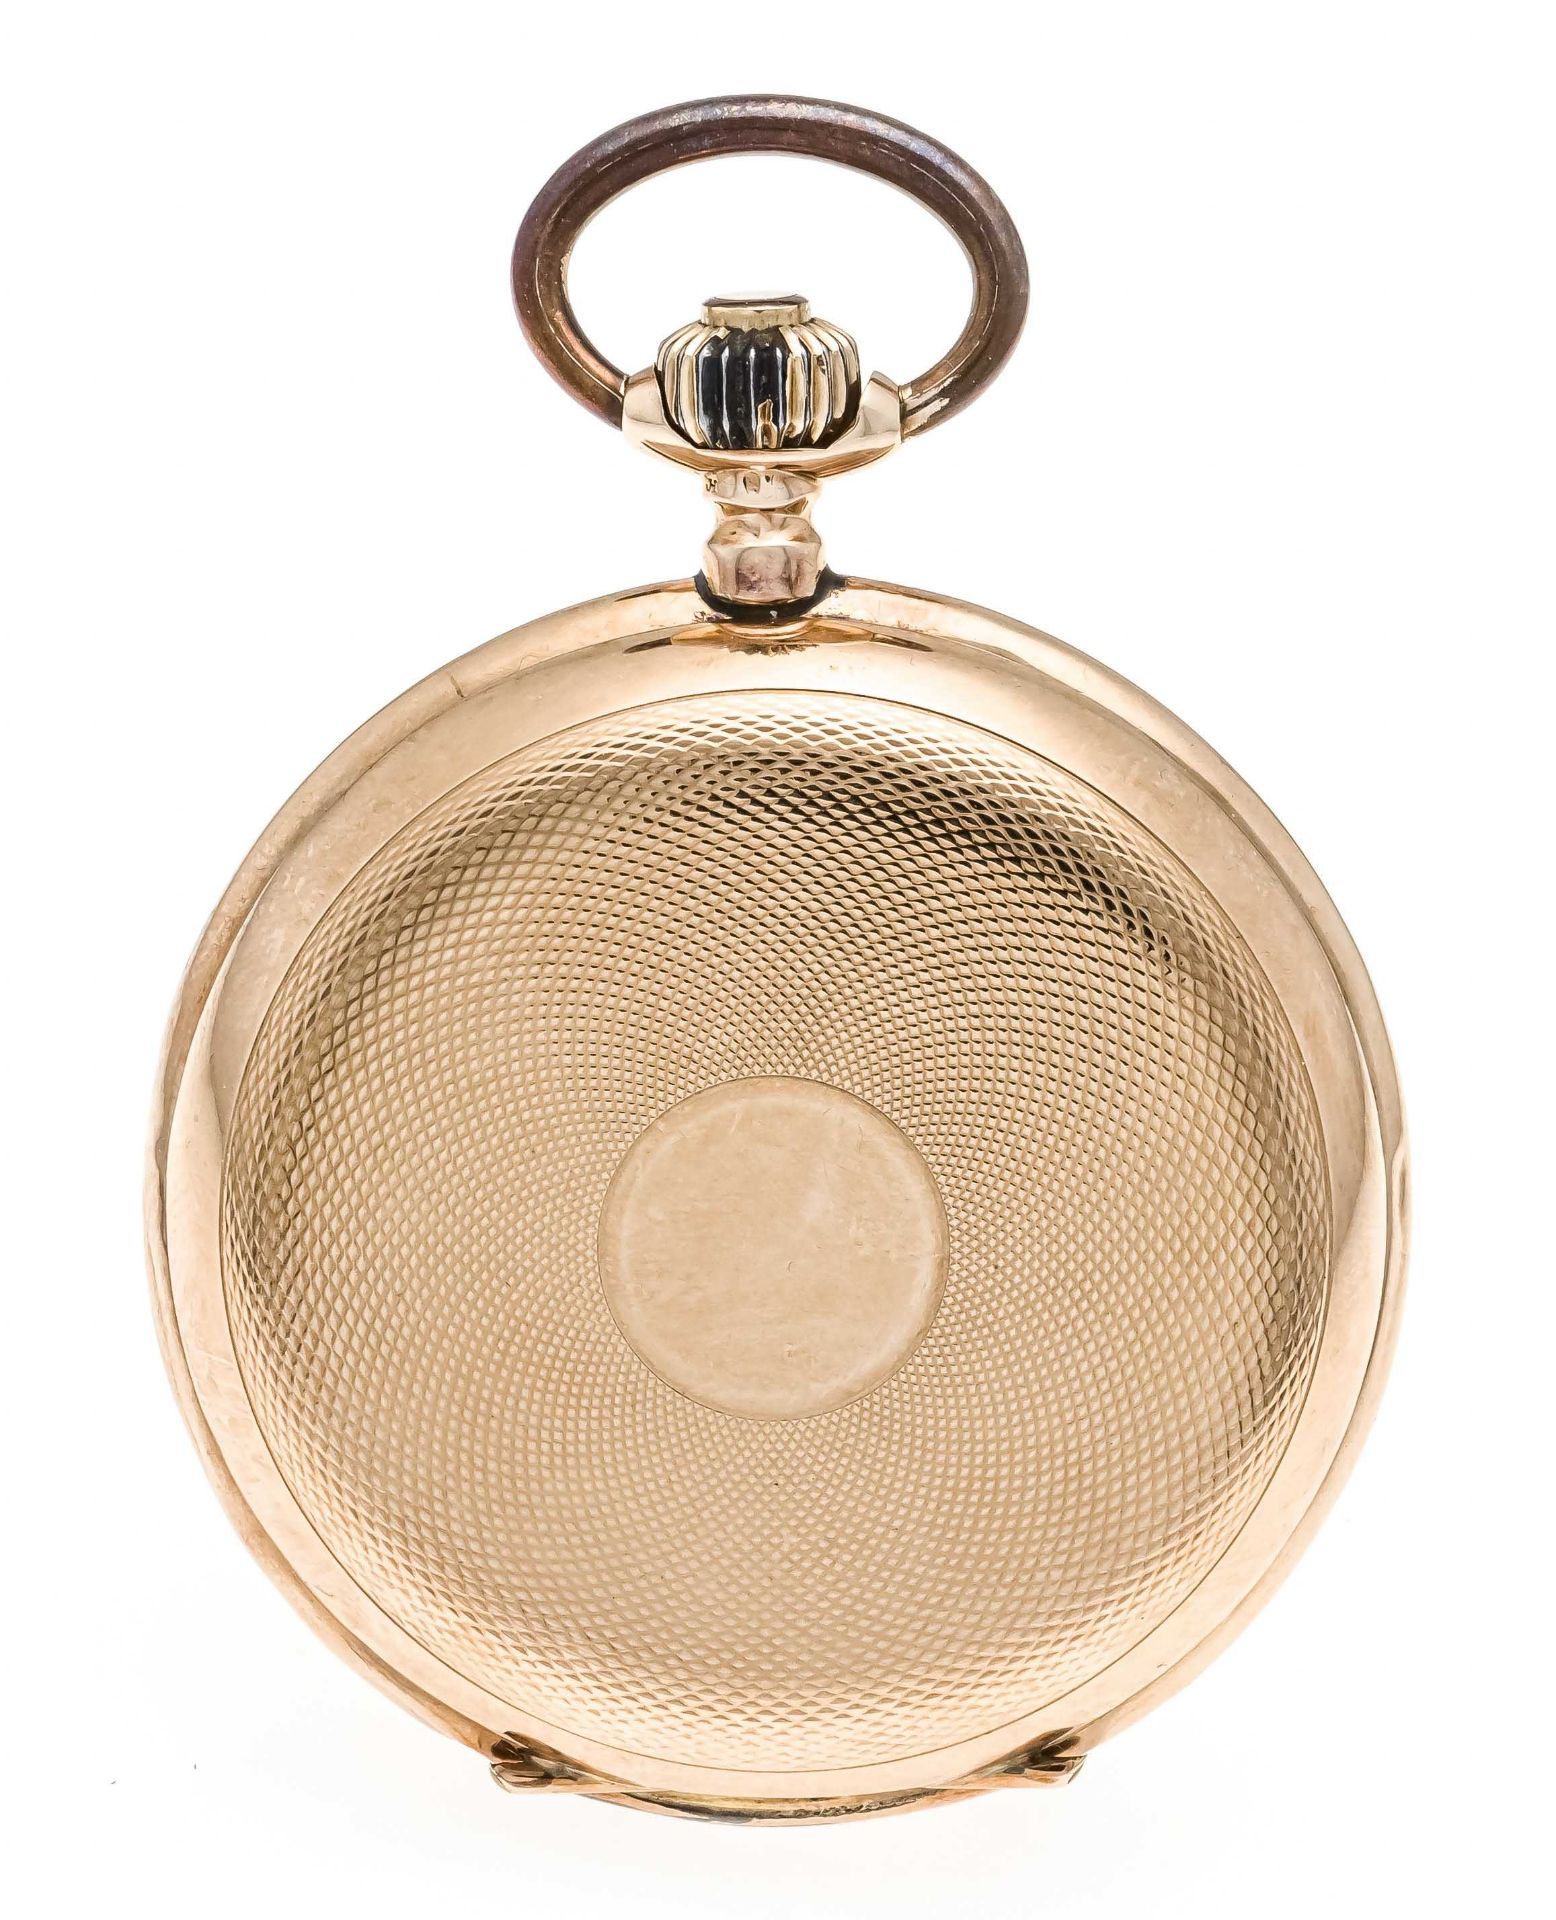 A gentleman's sprung-cap pocket watch, 585/000 GG, 2 gold covers, engine-turned case on both - Image 2 of 5